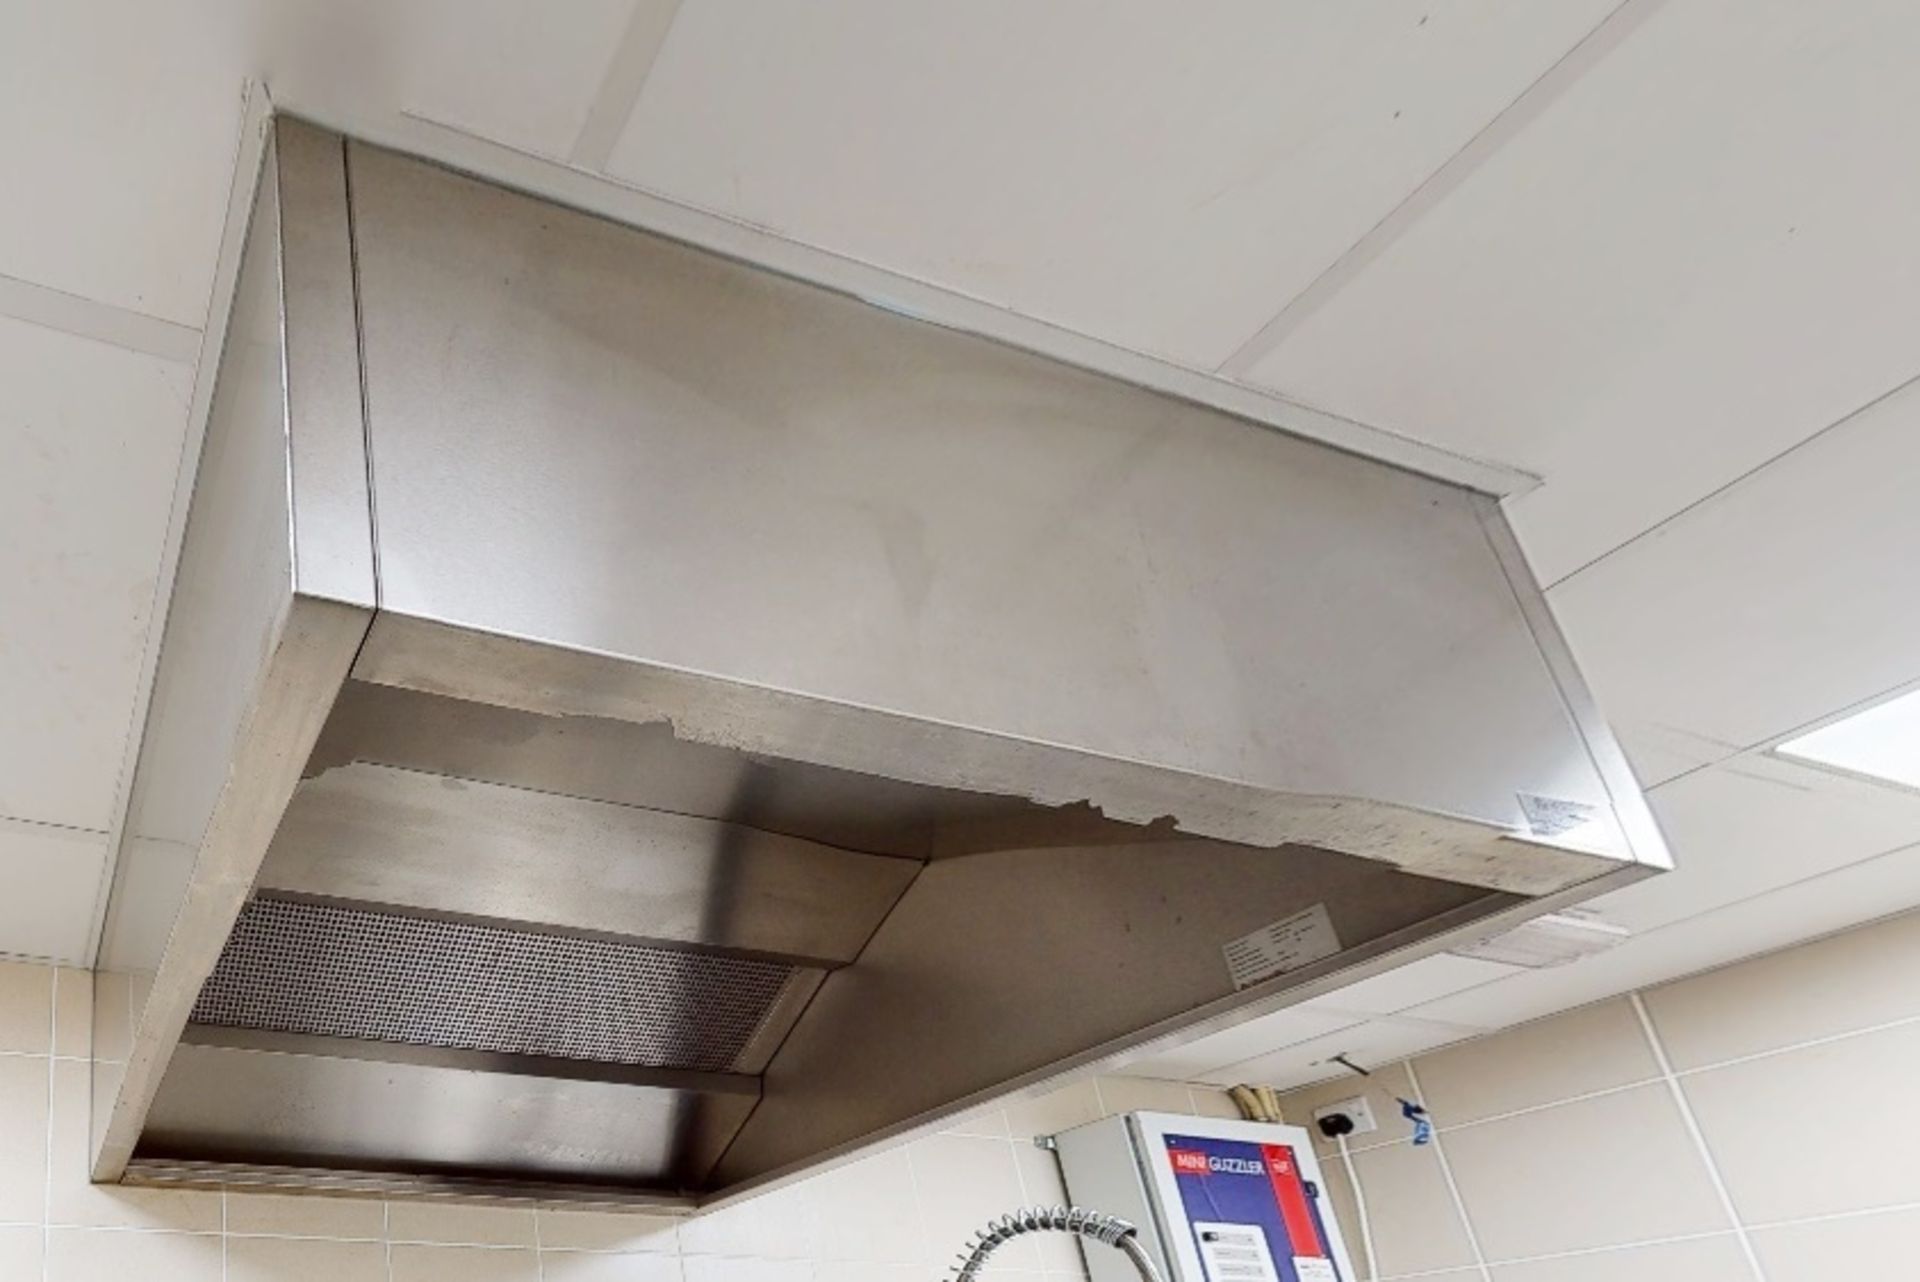 1 x Commercial Stainless Steel Extraction Canopy - CL701 - Location: Ashton Moss, Manchester, OL7 - Image 5 of 8